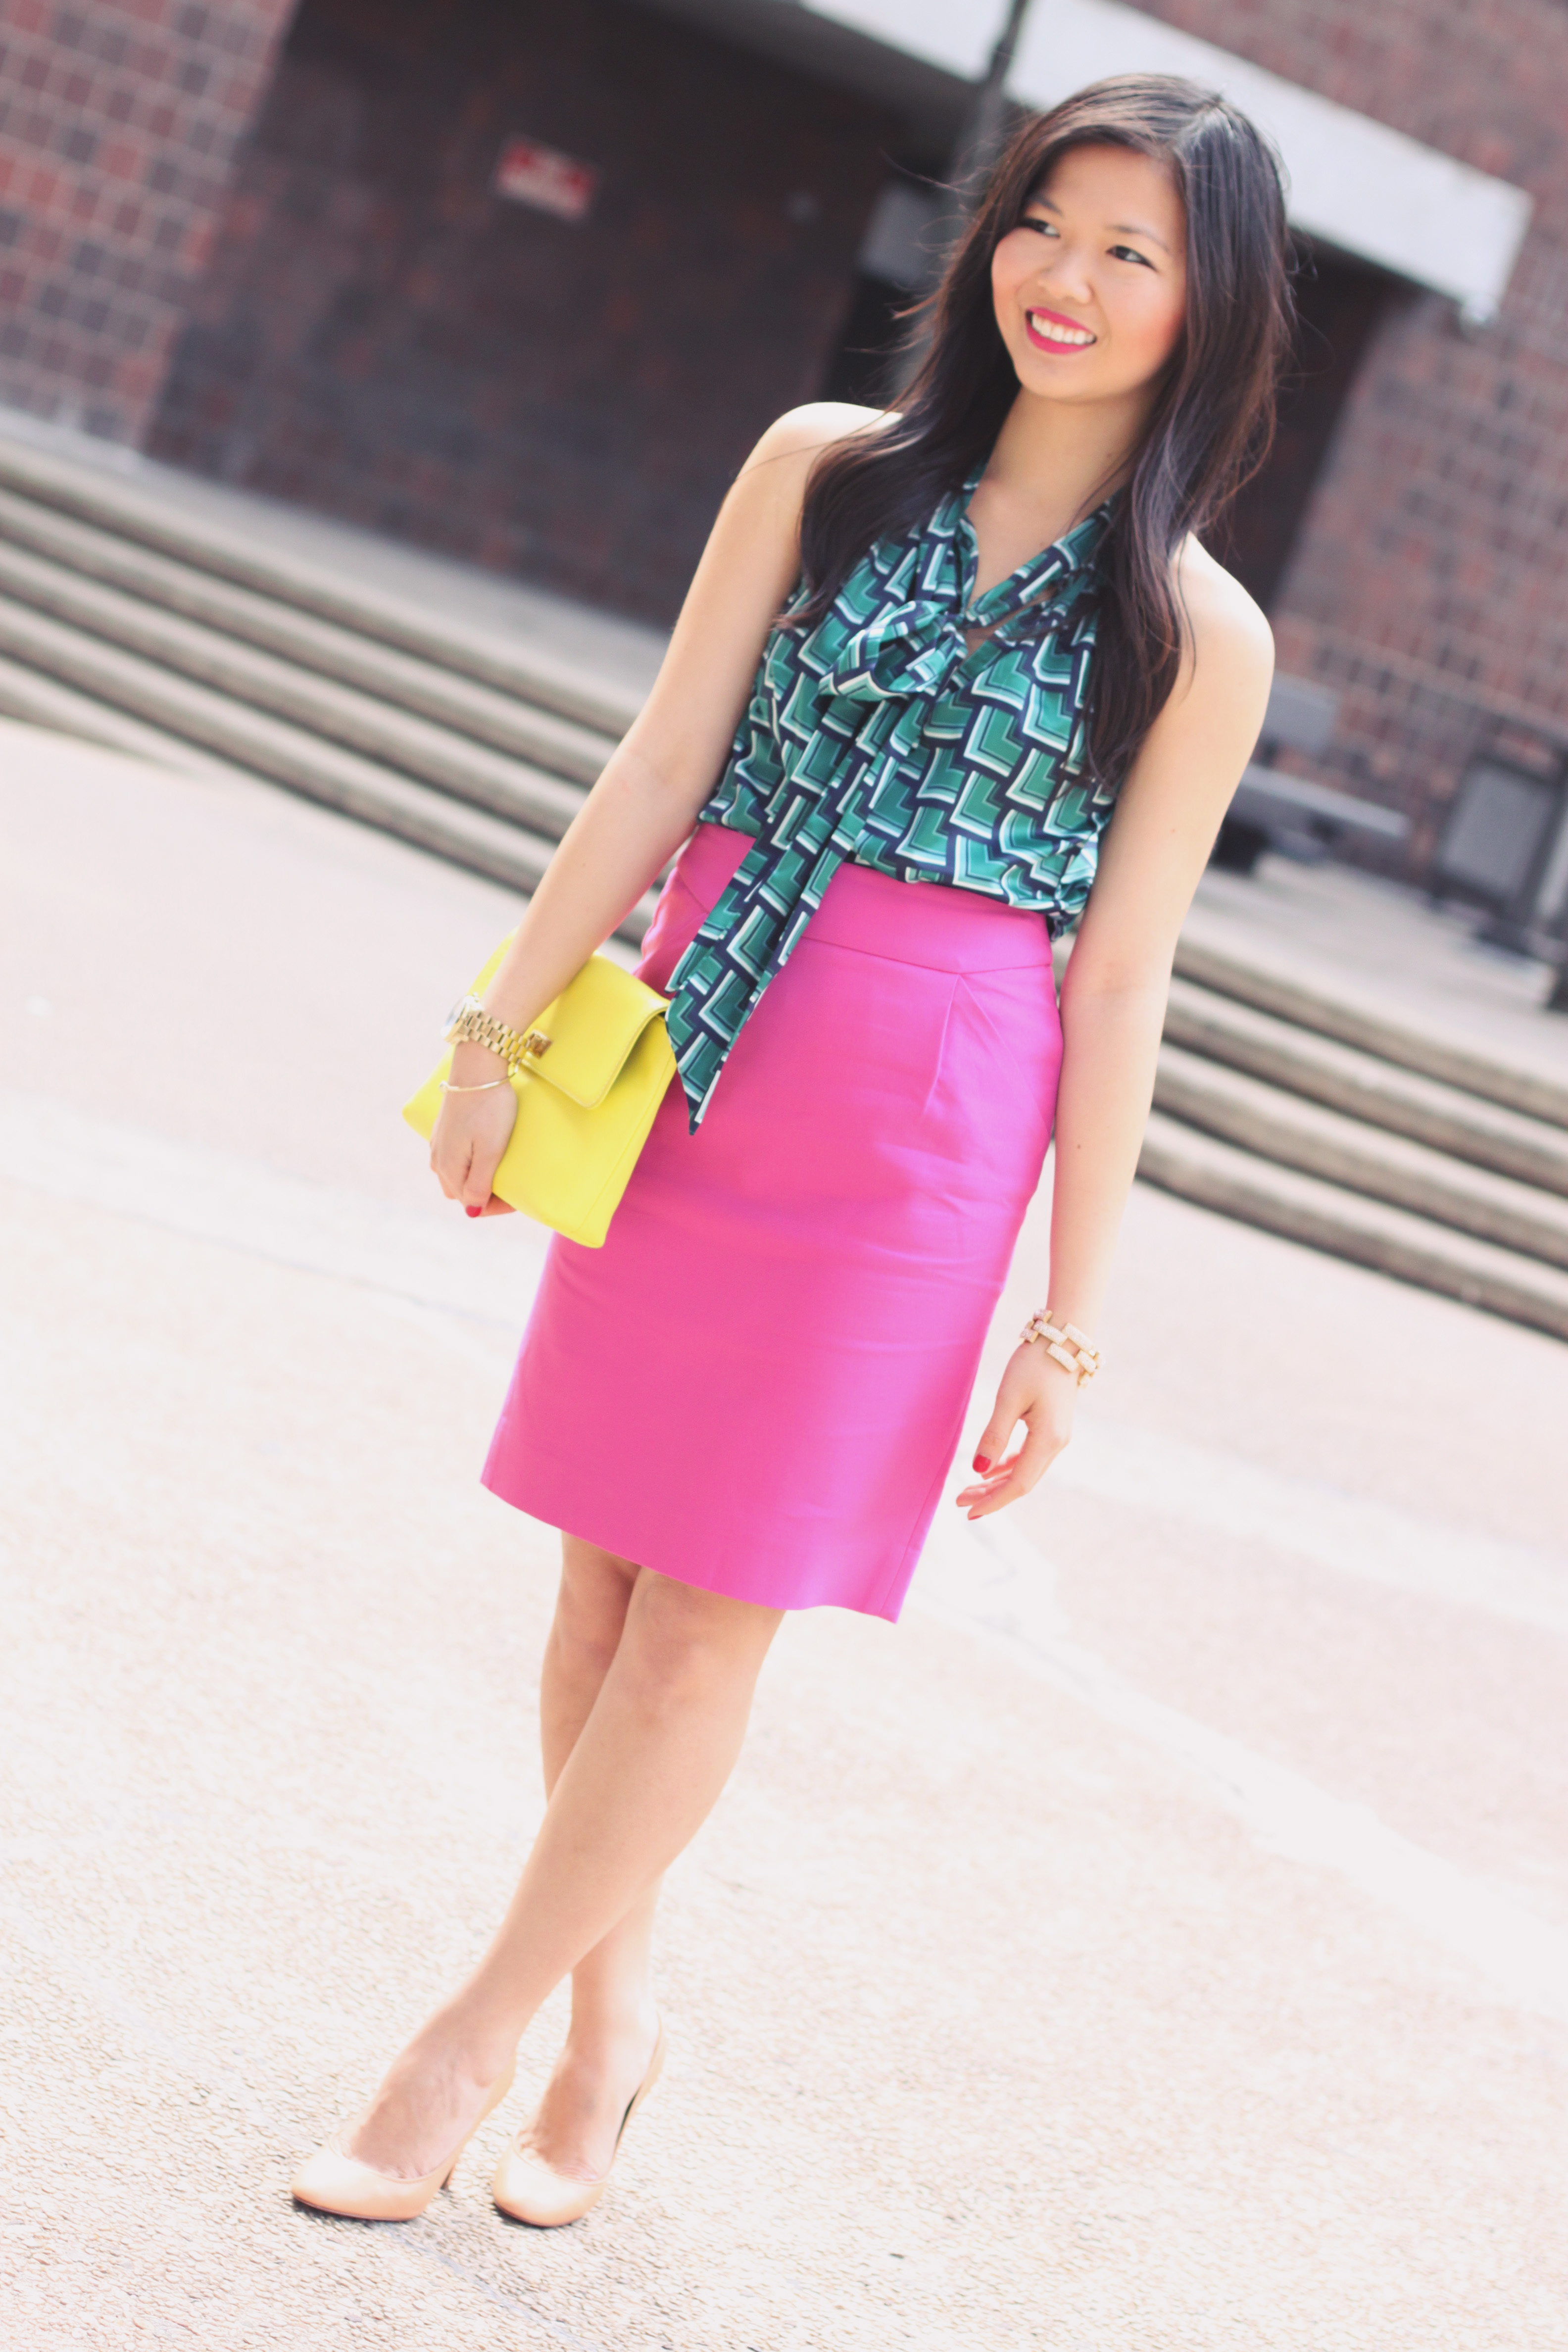 Skirt The Rules Blog; NYC fashion blogger; style blog; spring outfit photos; Banana Republic Factory turquoise print bow blouse; J.Crew Factory Pencil Skirt in Double Serge Cotton; J.Crew Pave Square Link Bracelet; Michael Kors gold mother of pearl boyfriend watch; J.Crew Factory Vero Clutch in neon yellow; Pour La Victoire Mai wedge pump